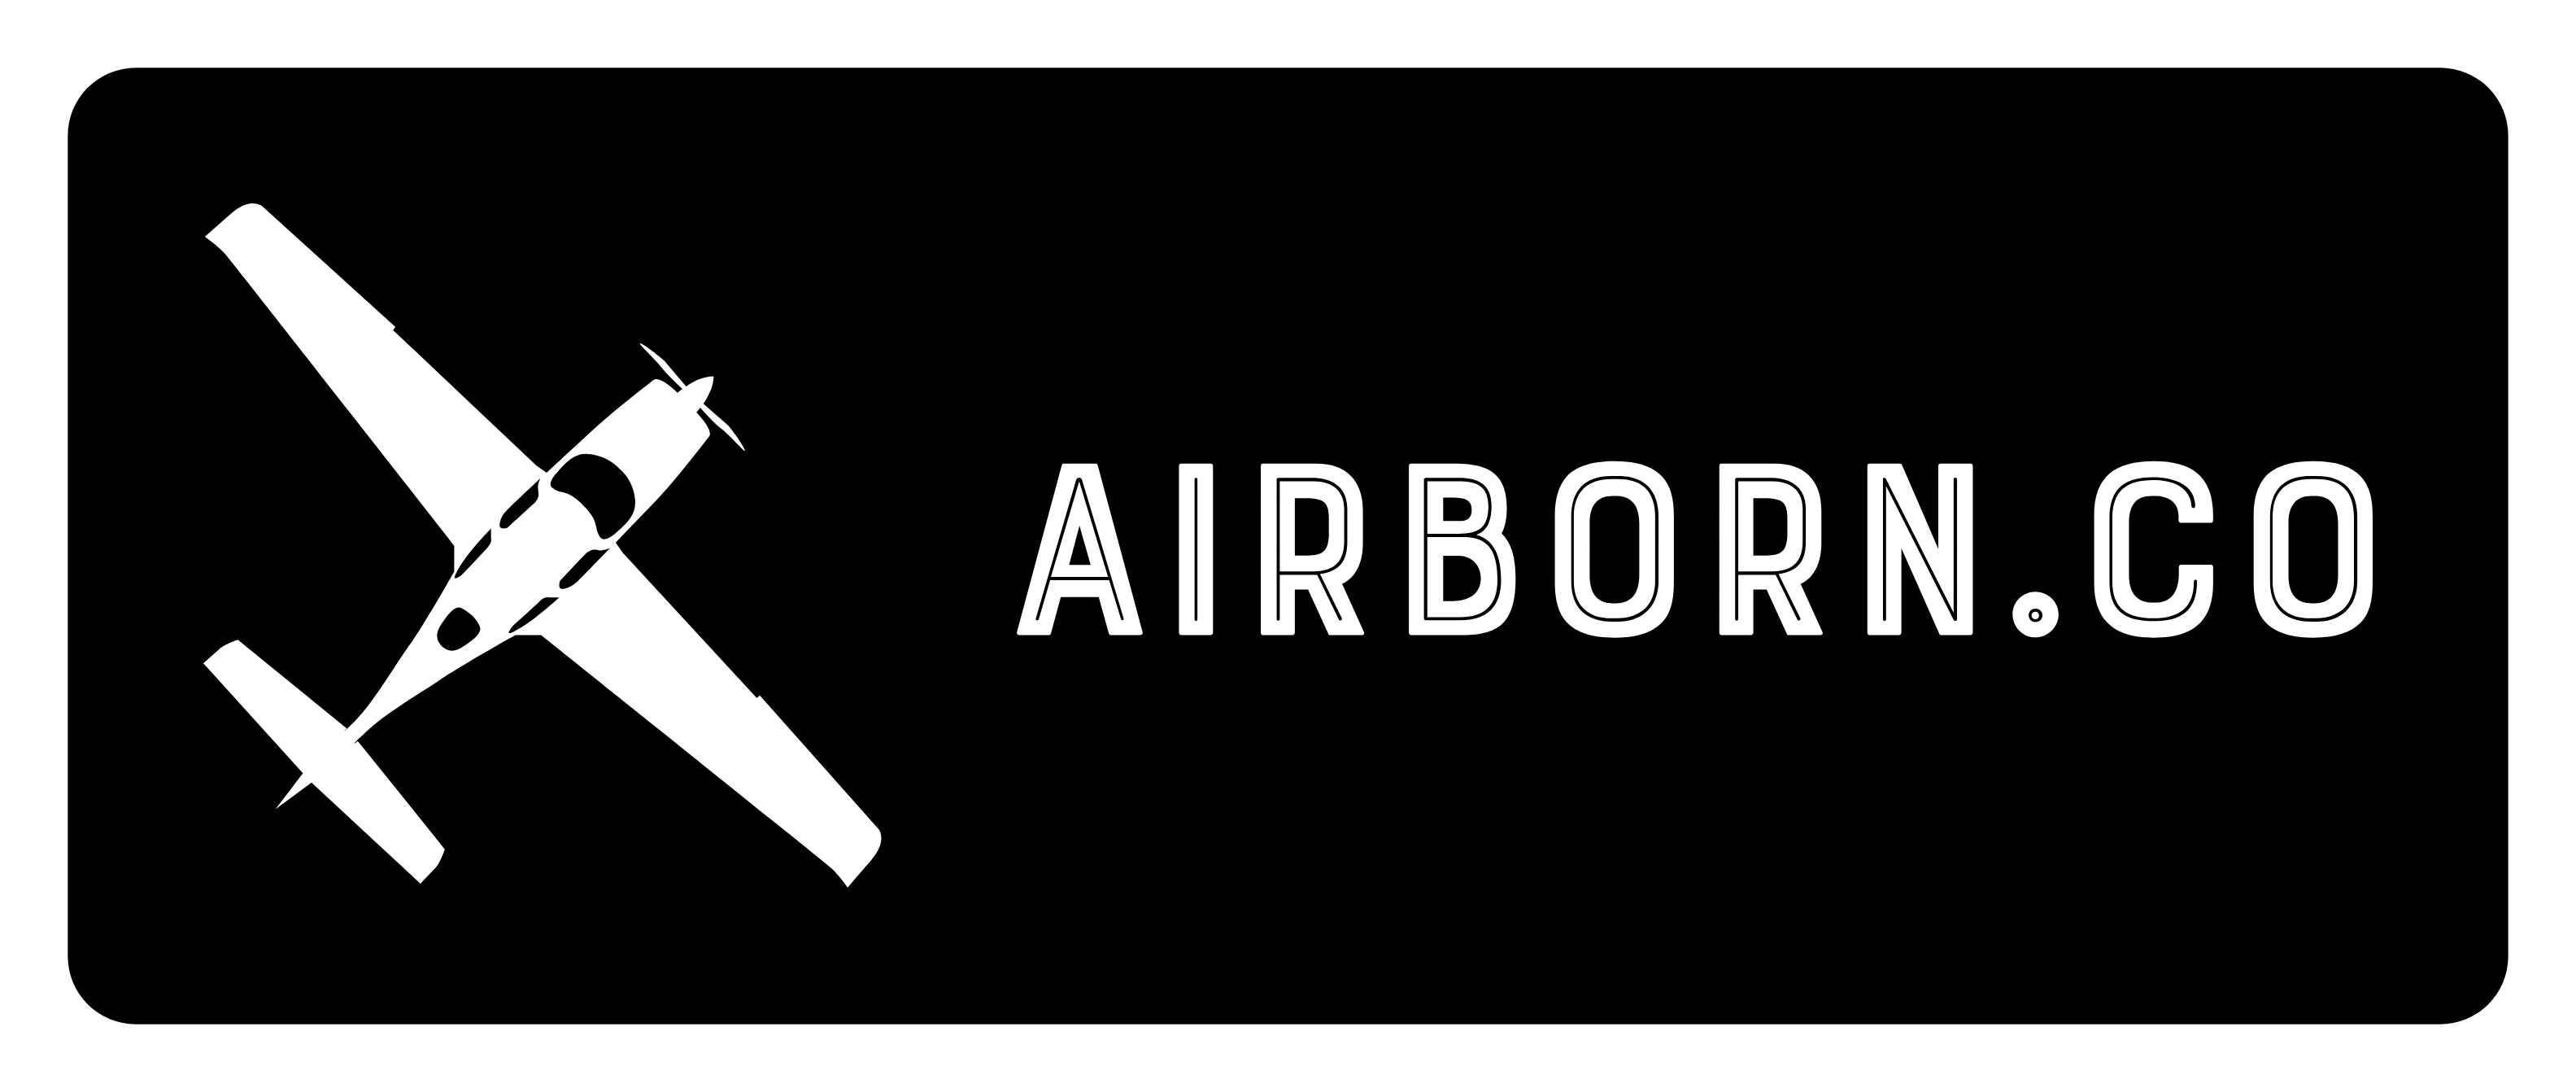 Airborn.co